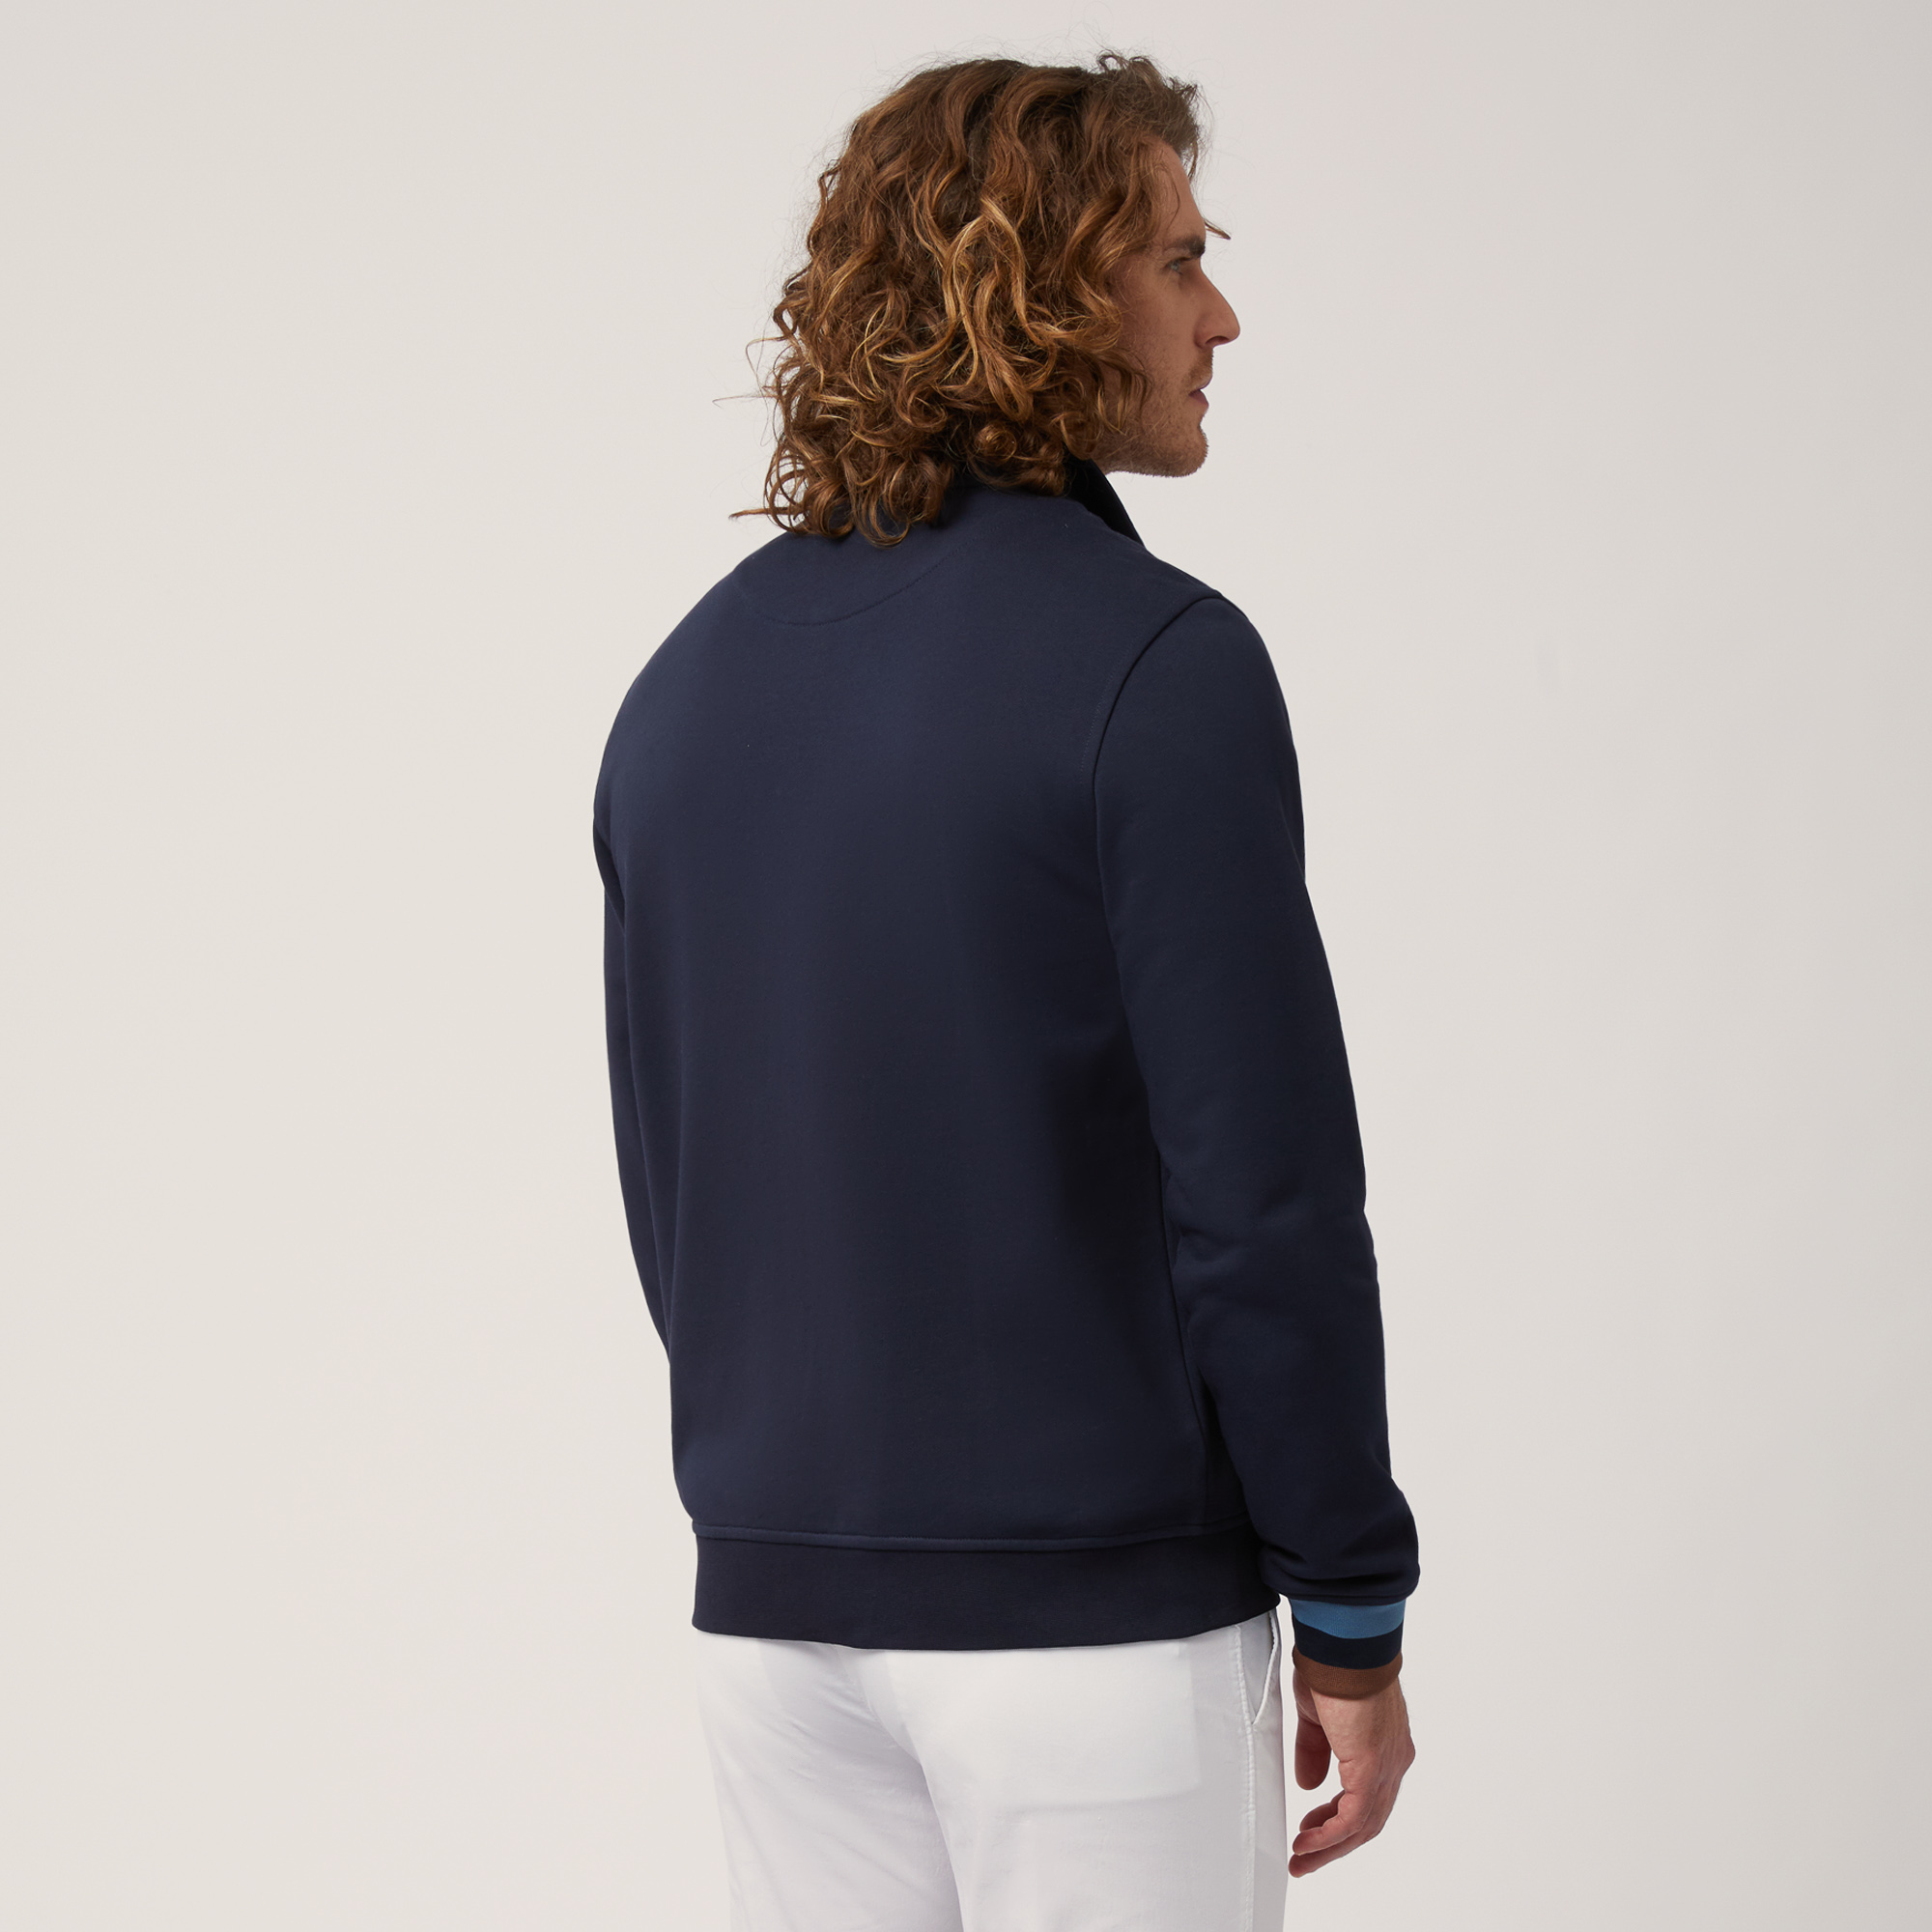 Cotton Full-Zip Sweatshirt with Striped Details, Blue, large image number 1